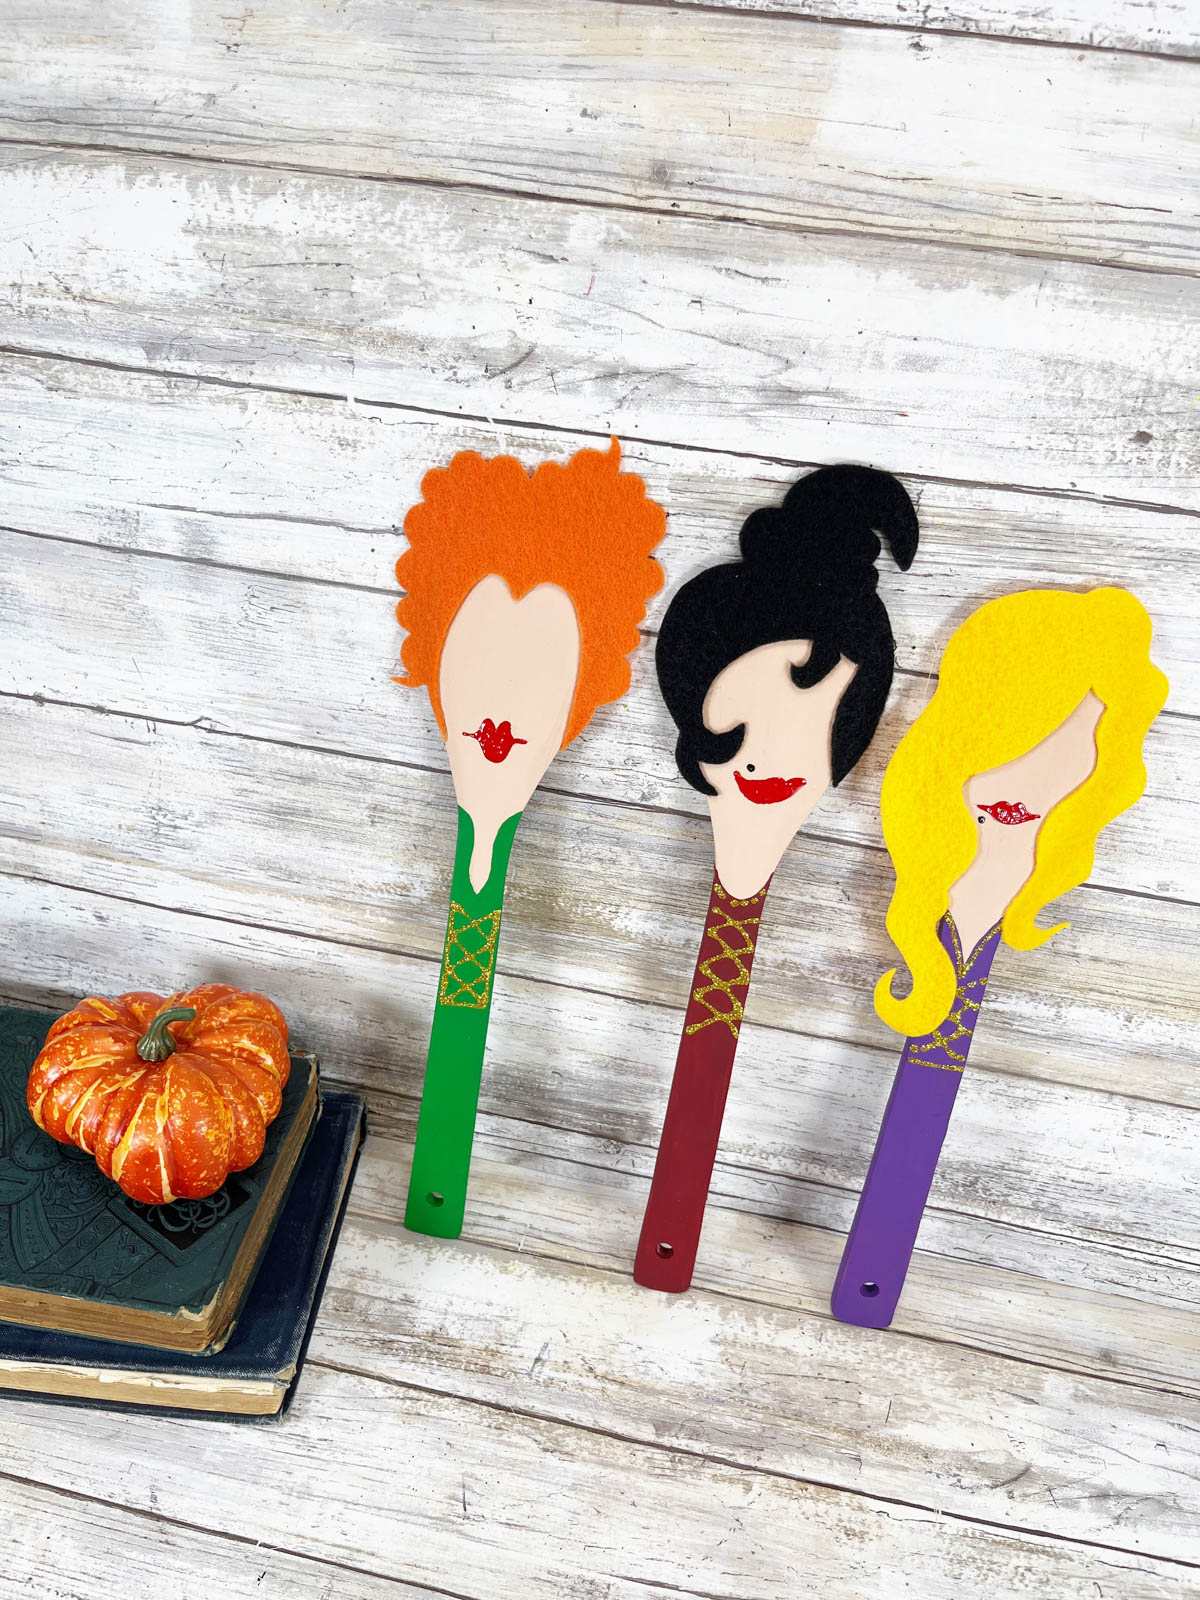 Three wooden spoon witches on a table next to pumpkins.